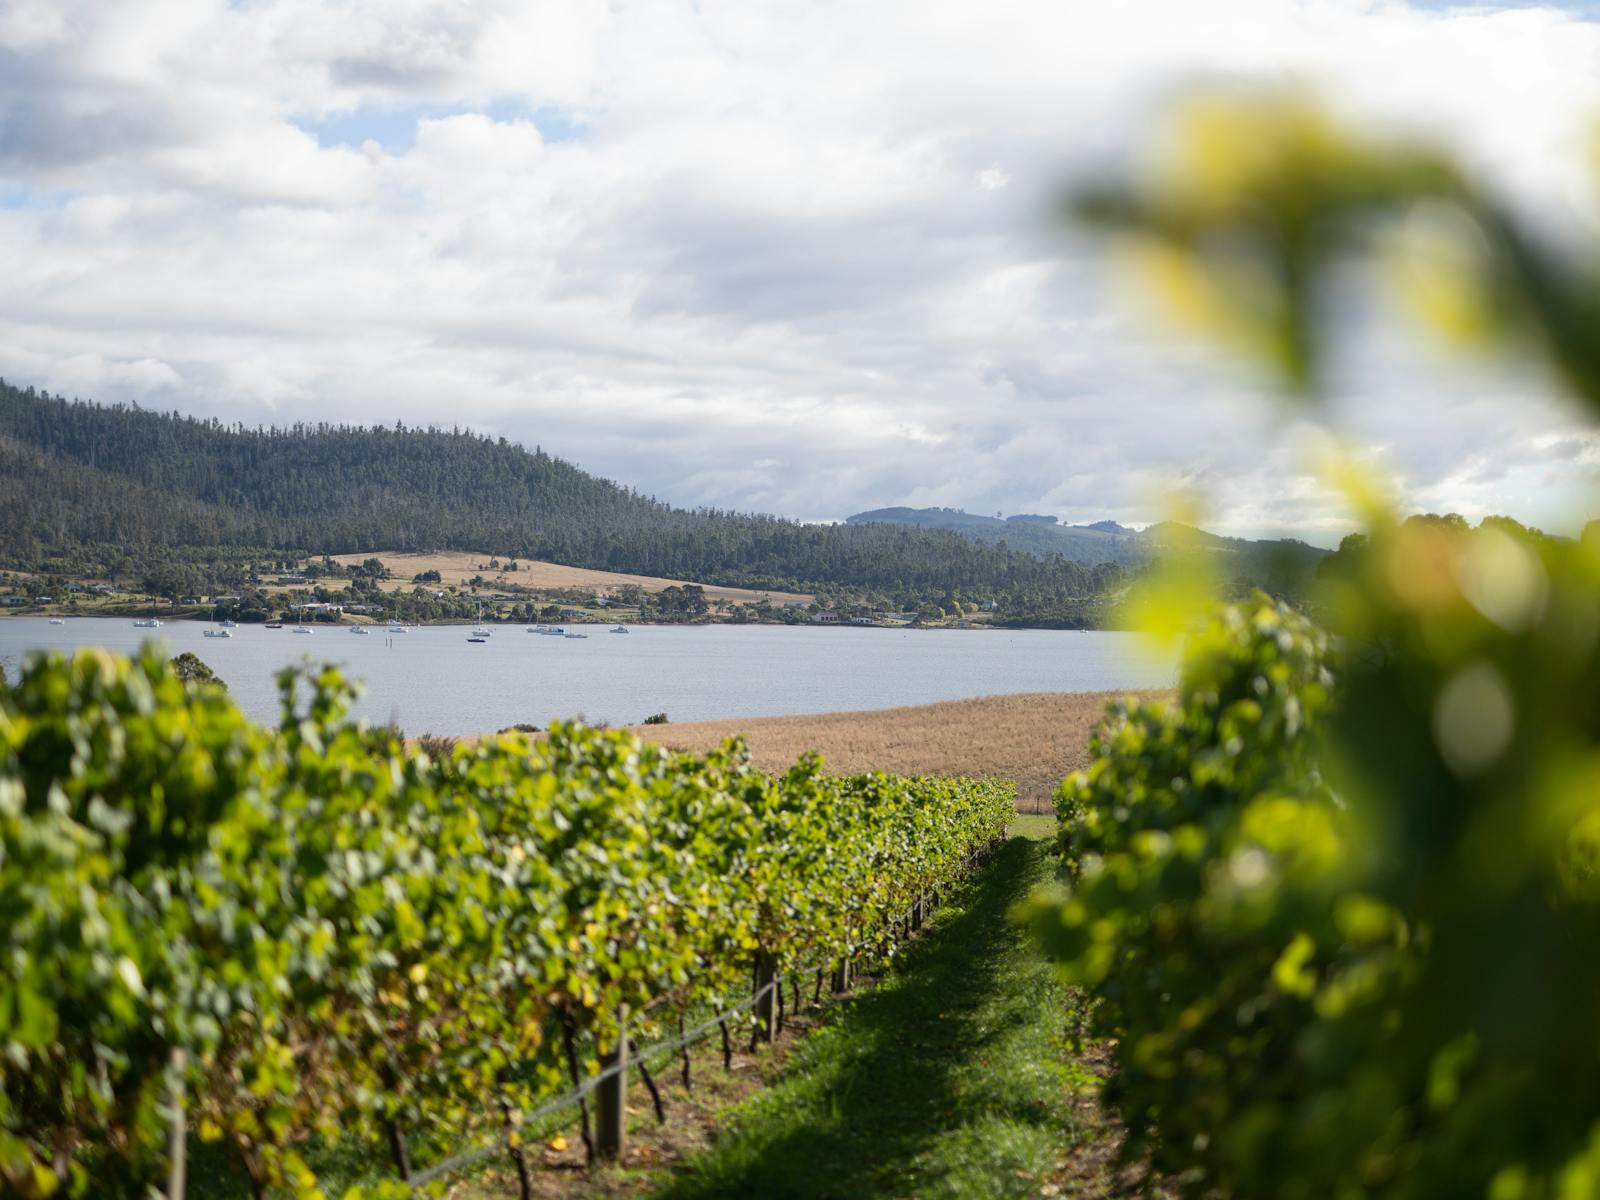 Enjoy wine and local produce in the vines overlooking the picturesque bay.